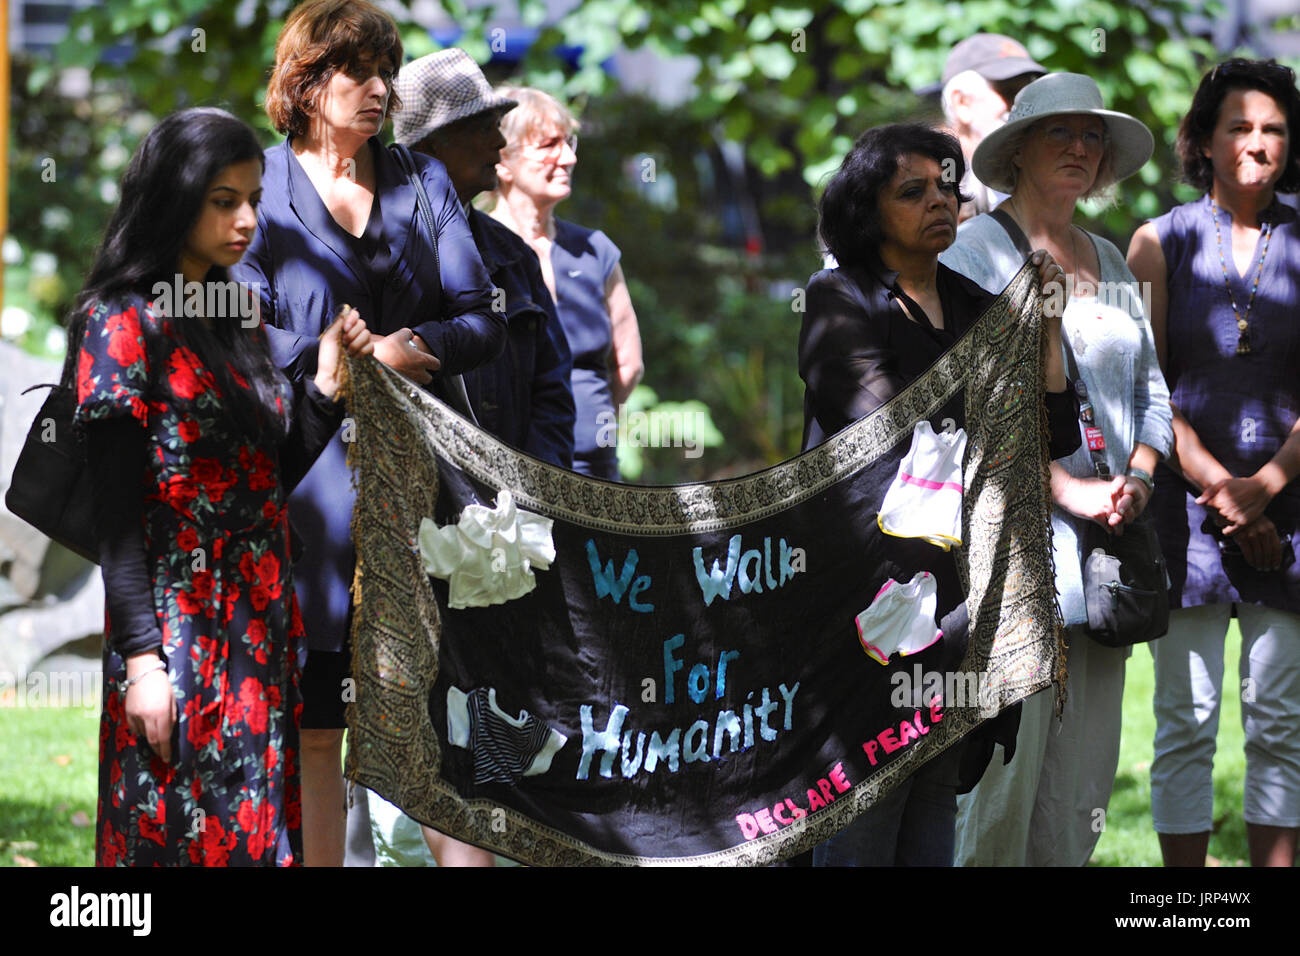 London, UK. 06th Aug, 2017. Anti-nuclear weapons demonstrators holding a banner at the Campaign for Nuclear Disarmament’s annual commemoration of the atomic bombing of Hiroshima, Japan in Tavistock Square, London, United Kingdom.  On 6 August 1967 a cherry tree was planted in the square by Camden Council in memory of the victims of the bombing. Since then an annual ceremony has been held around the tree to remember the attack.  The attack took place at 8.15am, 6 August 1945, when the Enola Gay Boeing B-29 Superfortress bomber dropped the ‘Little Boy’ atomic bomb, the first use of the weapon in Stock Photo